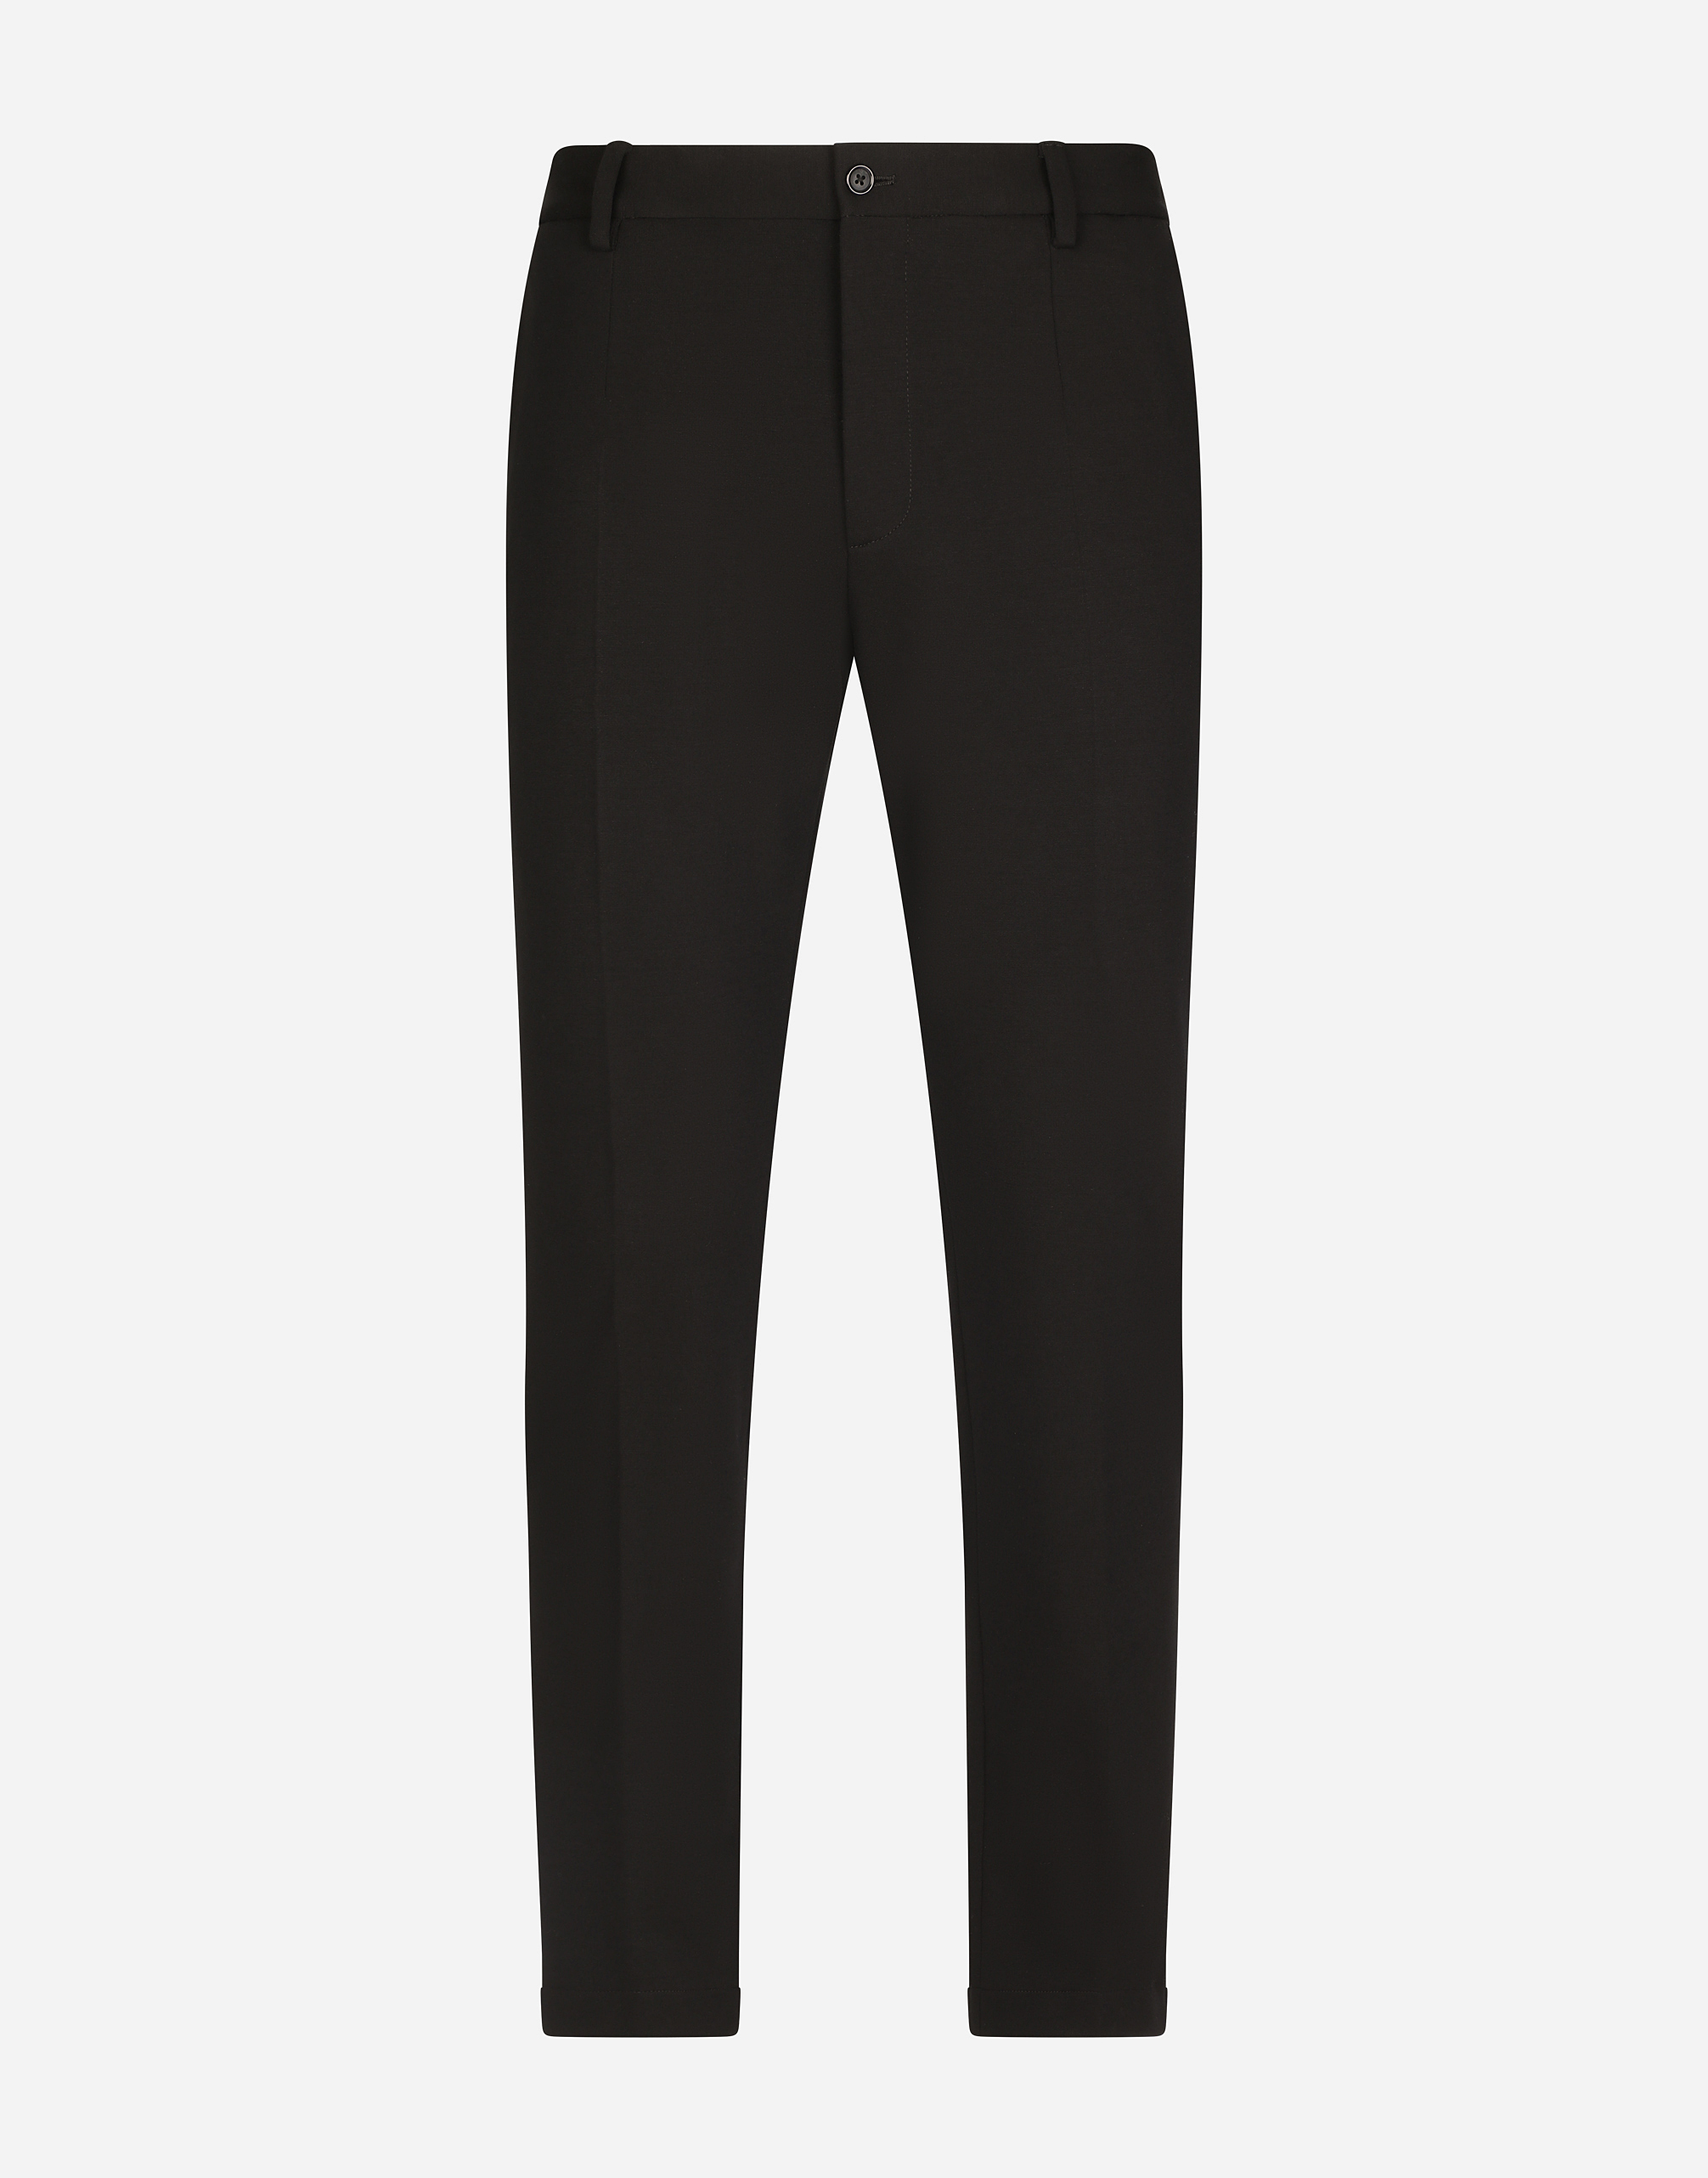 Stretch jersey pants in Black